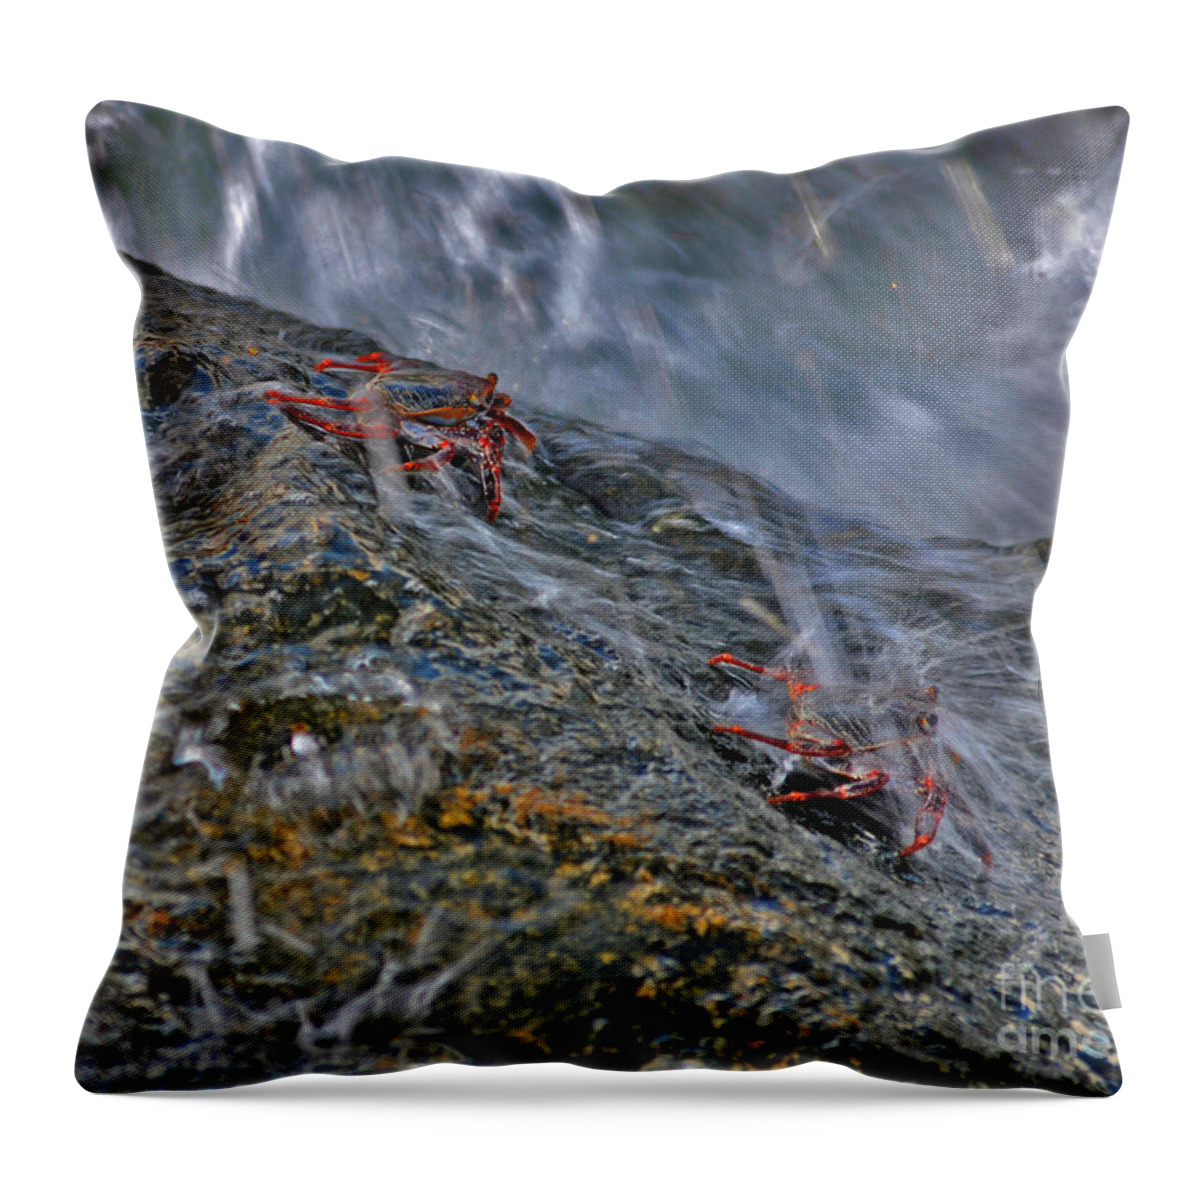 Rock Crabs Throw Pillow featuring the photograph 19- Follow Me by Joseph Keane